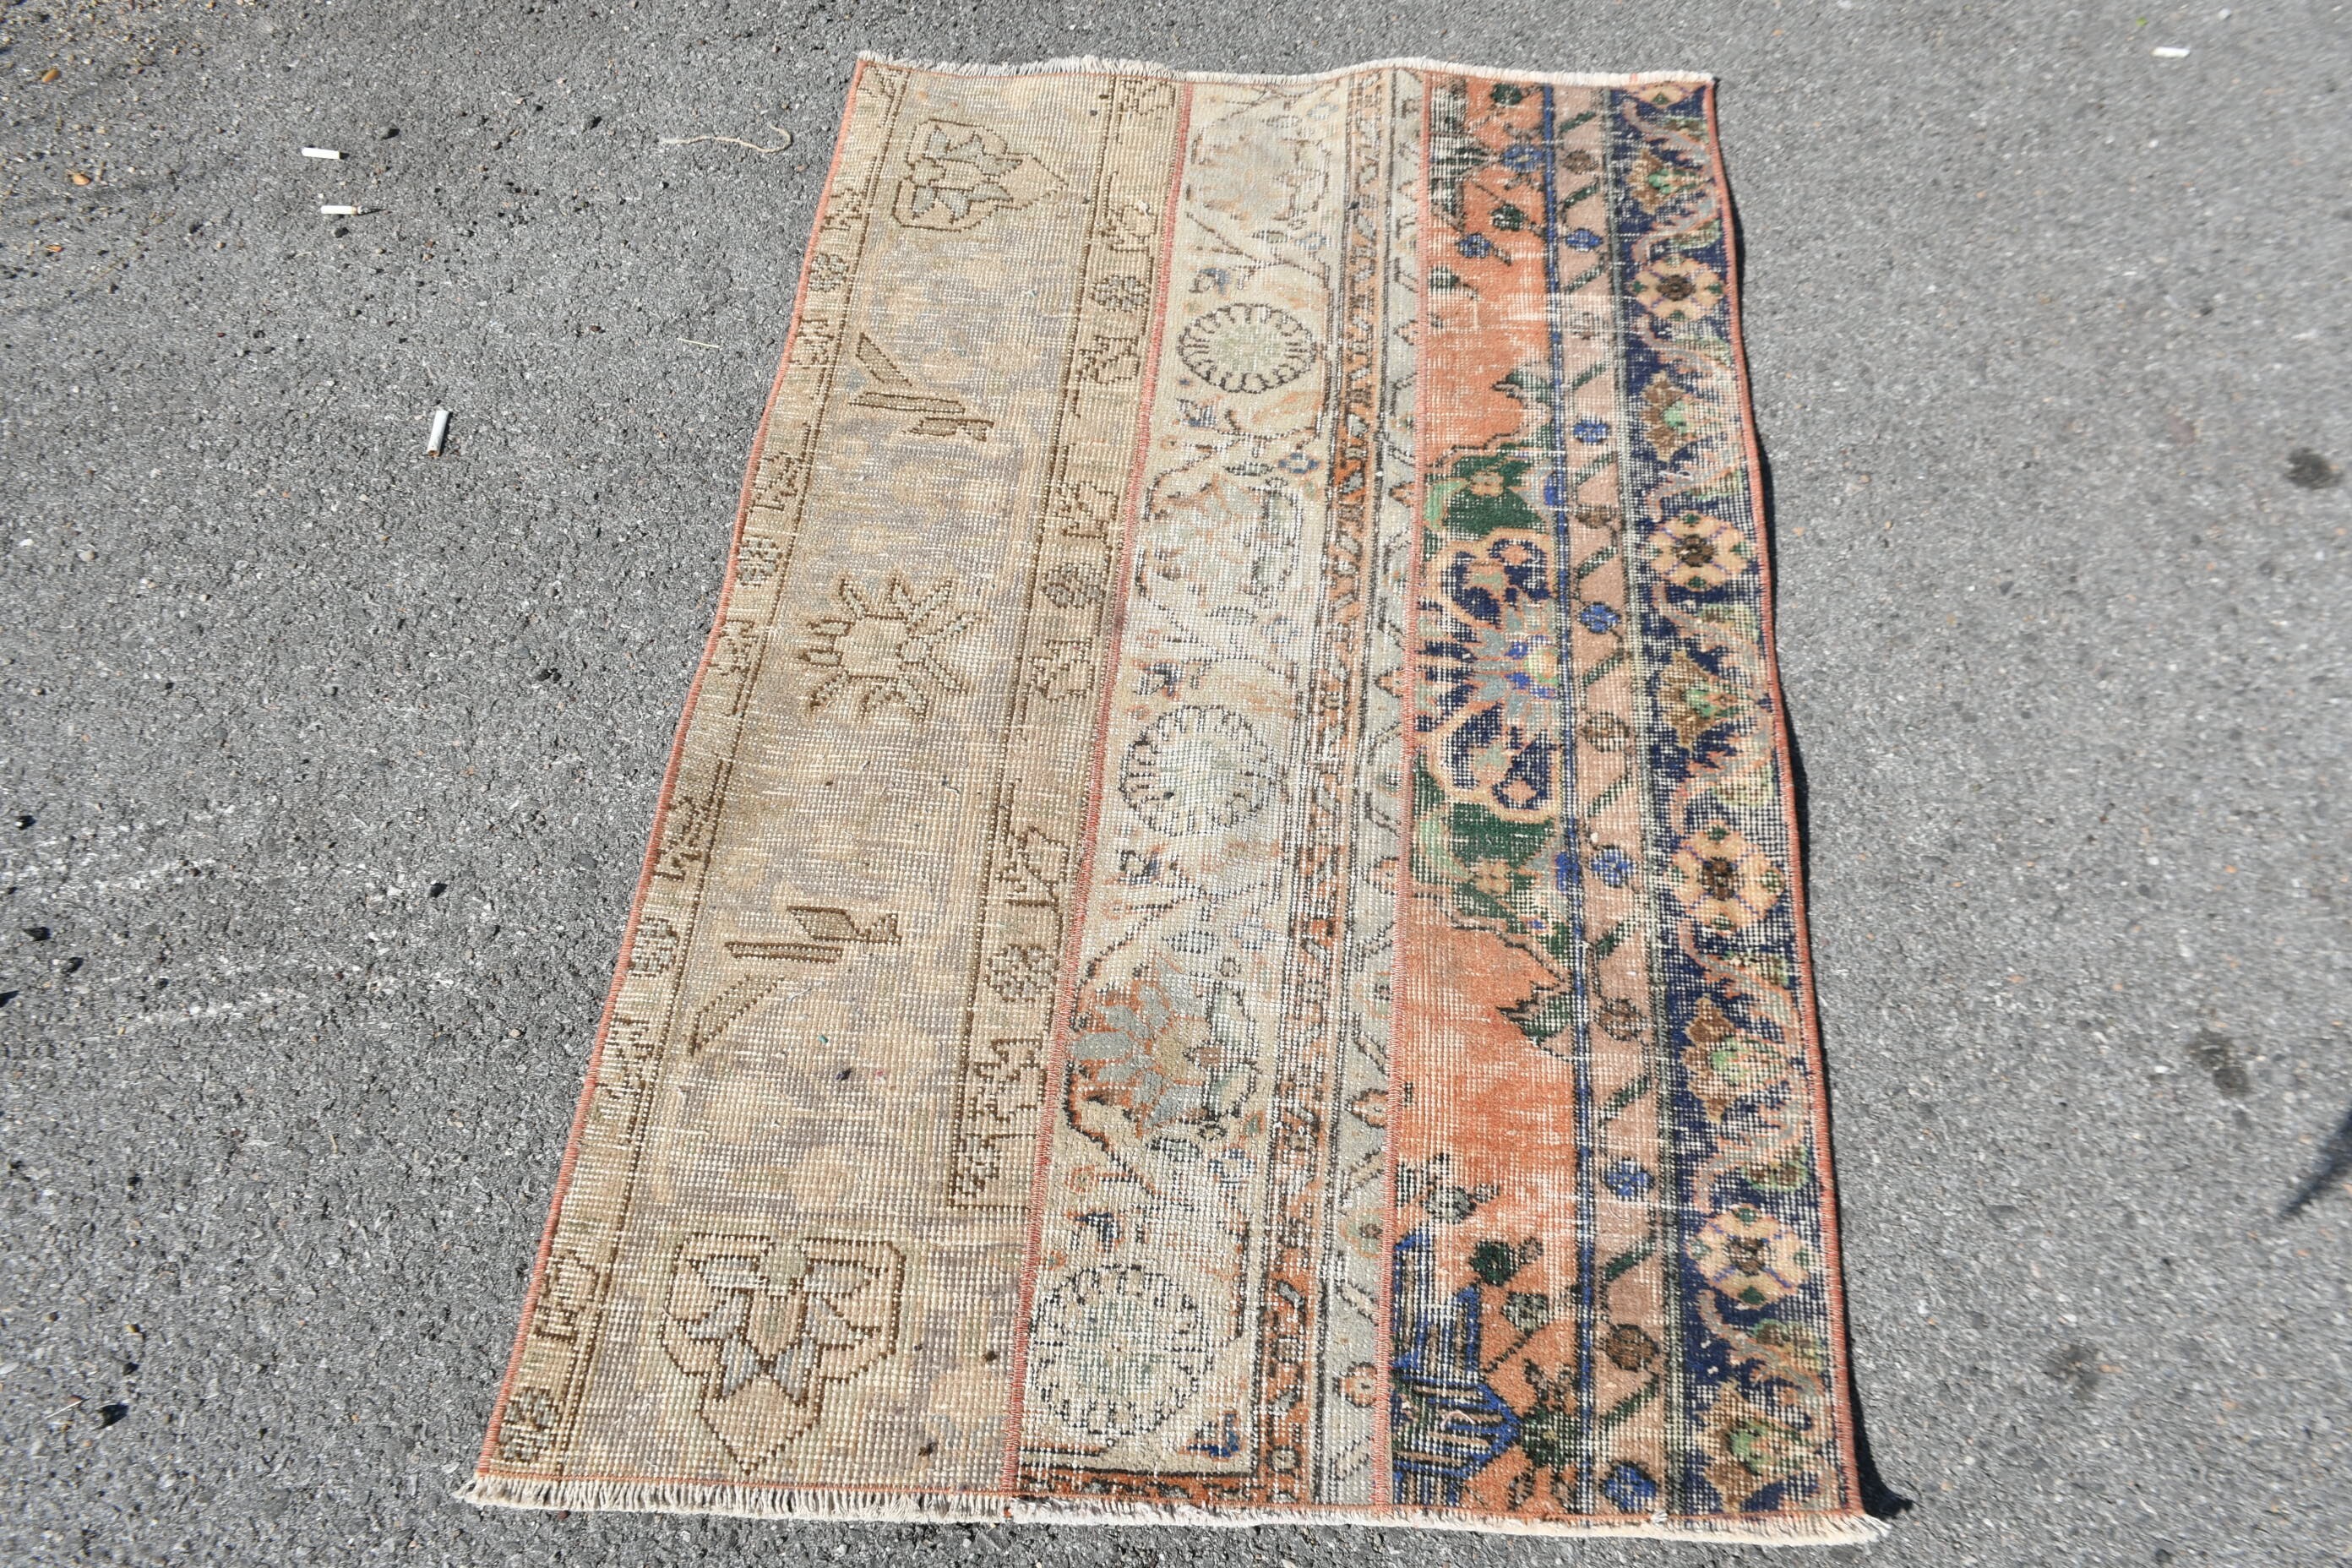 2.5x4 ft Small Rugs, Old Rug, Car Mat Rug, Kitchen Rugs, Turkish Rug, Vintage Rug, Rugs for Nursery, Anatolian Rugs, Orange Home Decor Rugs